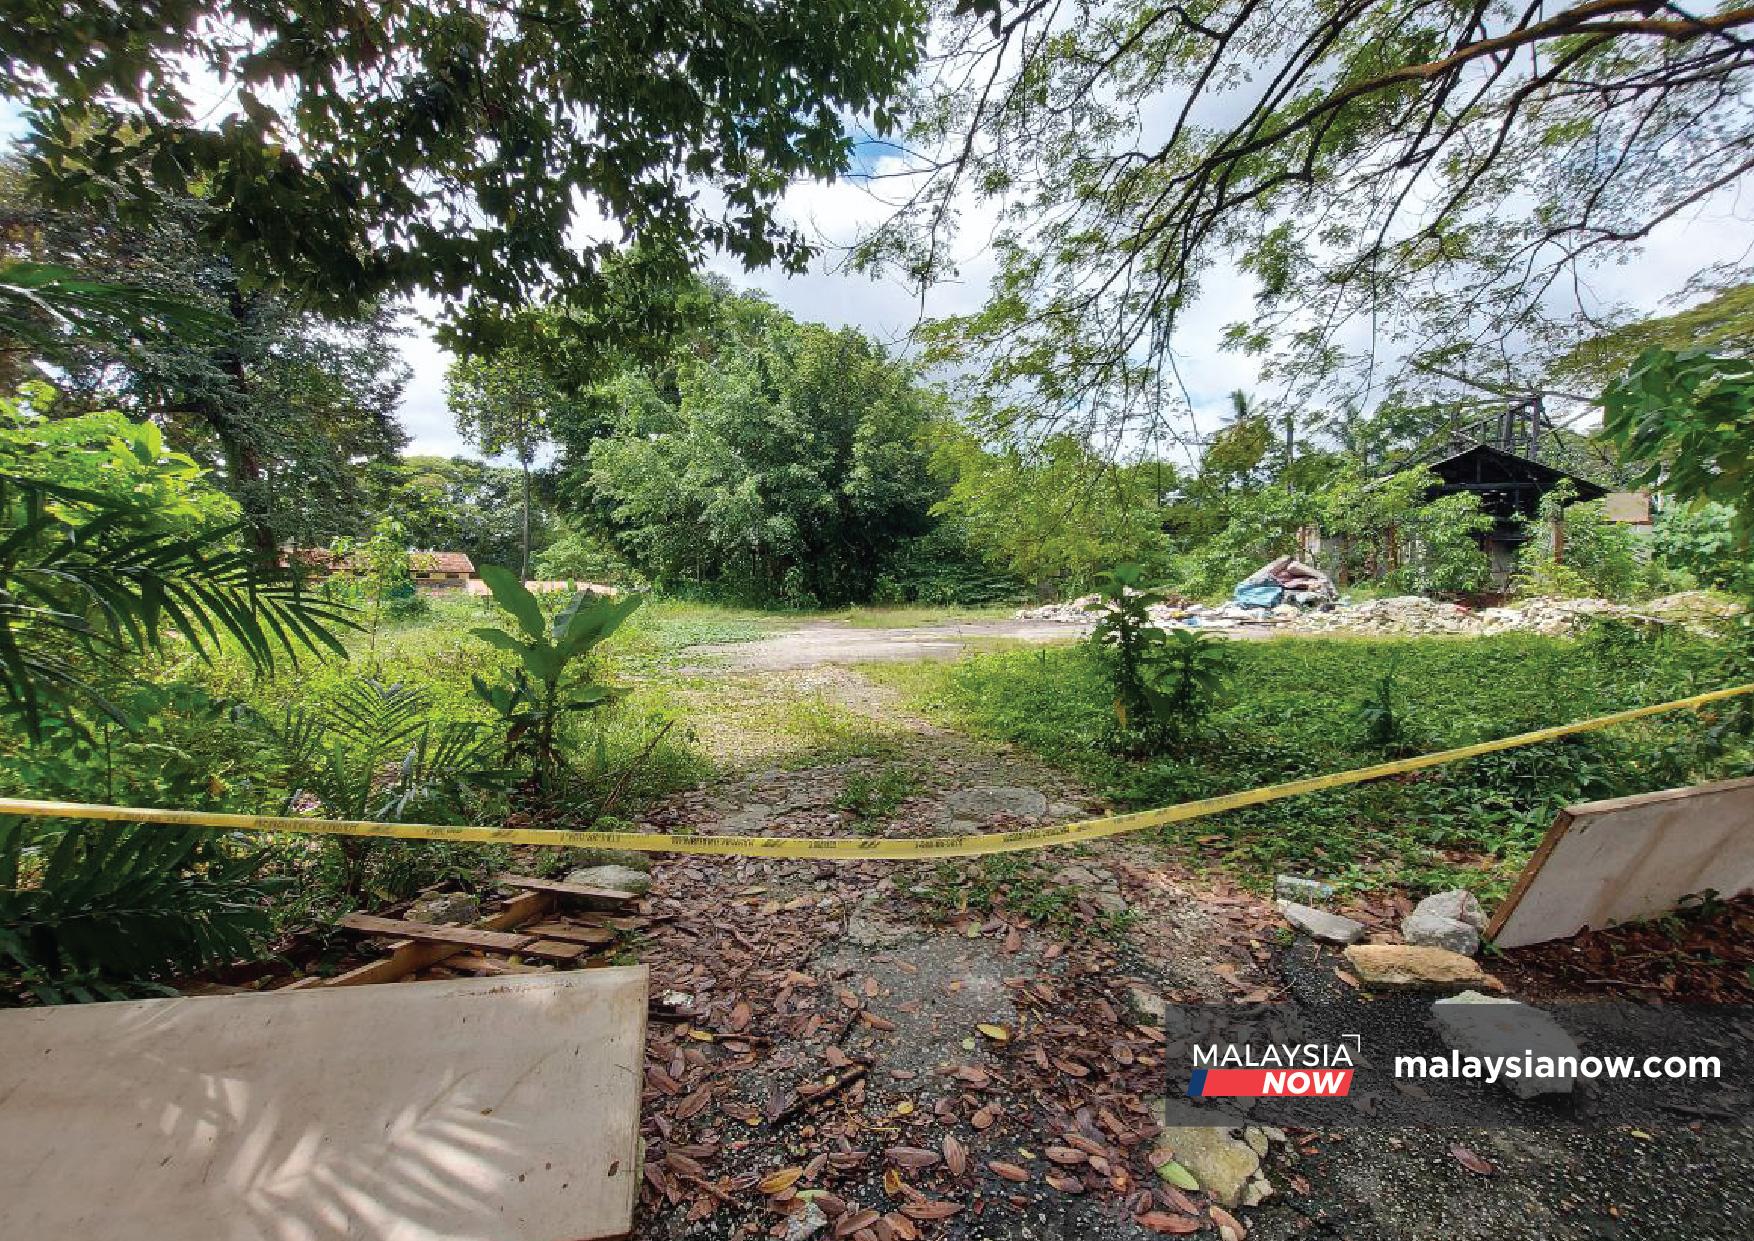 The sealed opening to a vacant plot of land in the leafy neighbourhood of Bukit Petaling, believed to be part of the property requested by Najib Razak in his application for government privileges accorded to him. The price of real estate here is among the highest in the country.